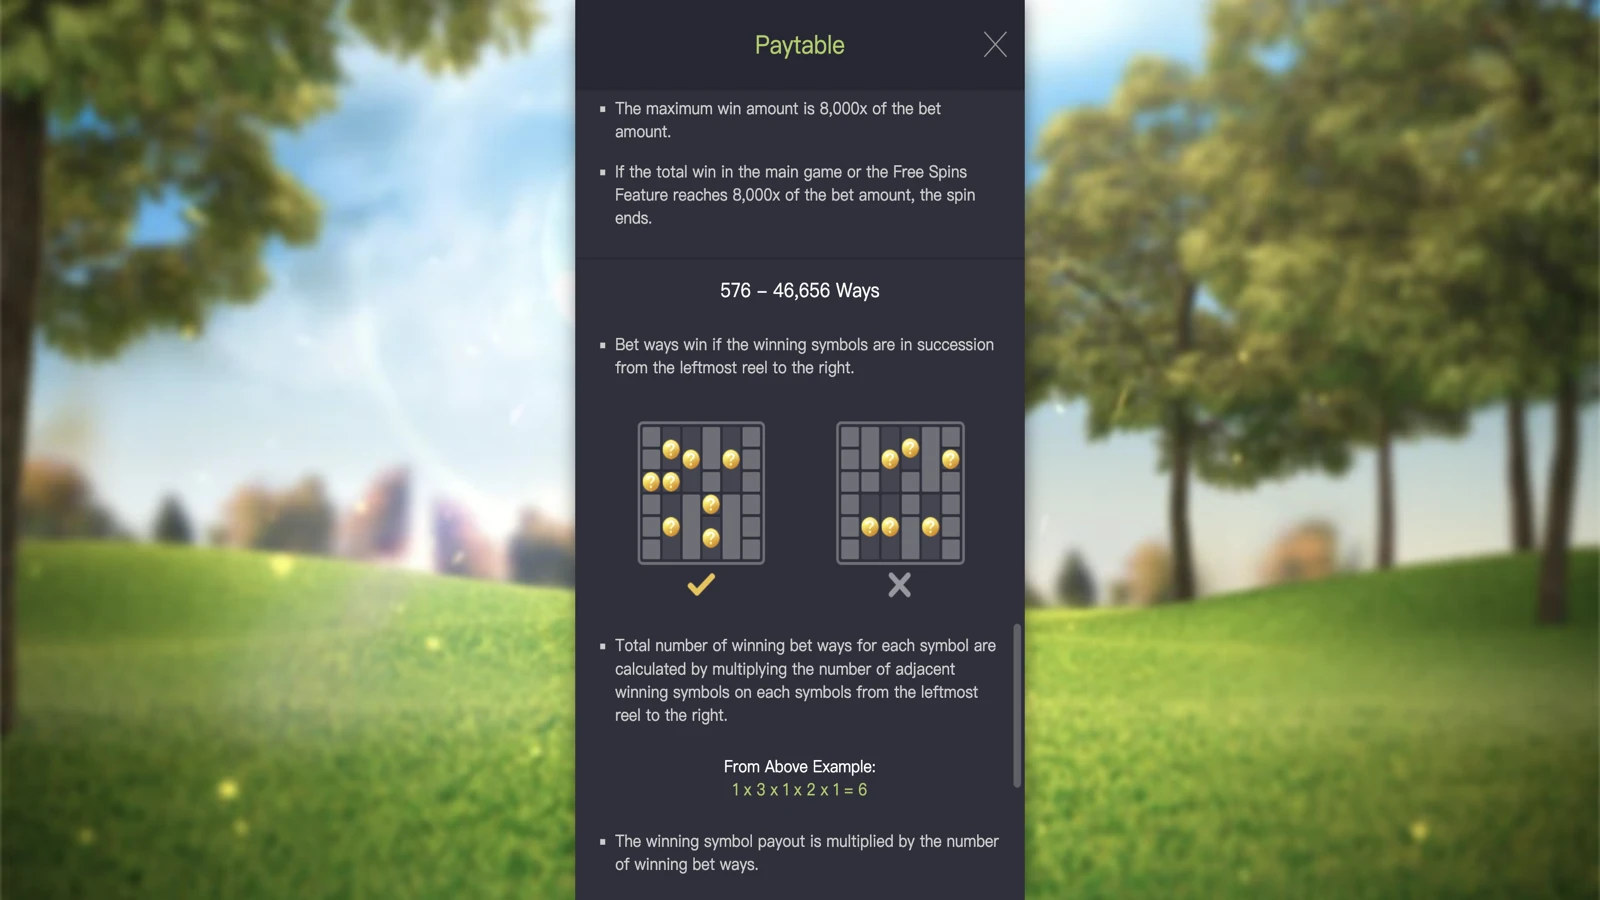 Super Golf Drive paytable 4